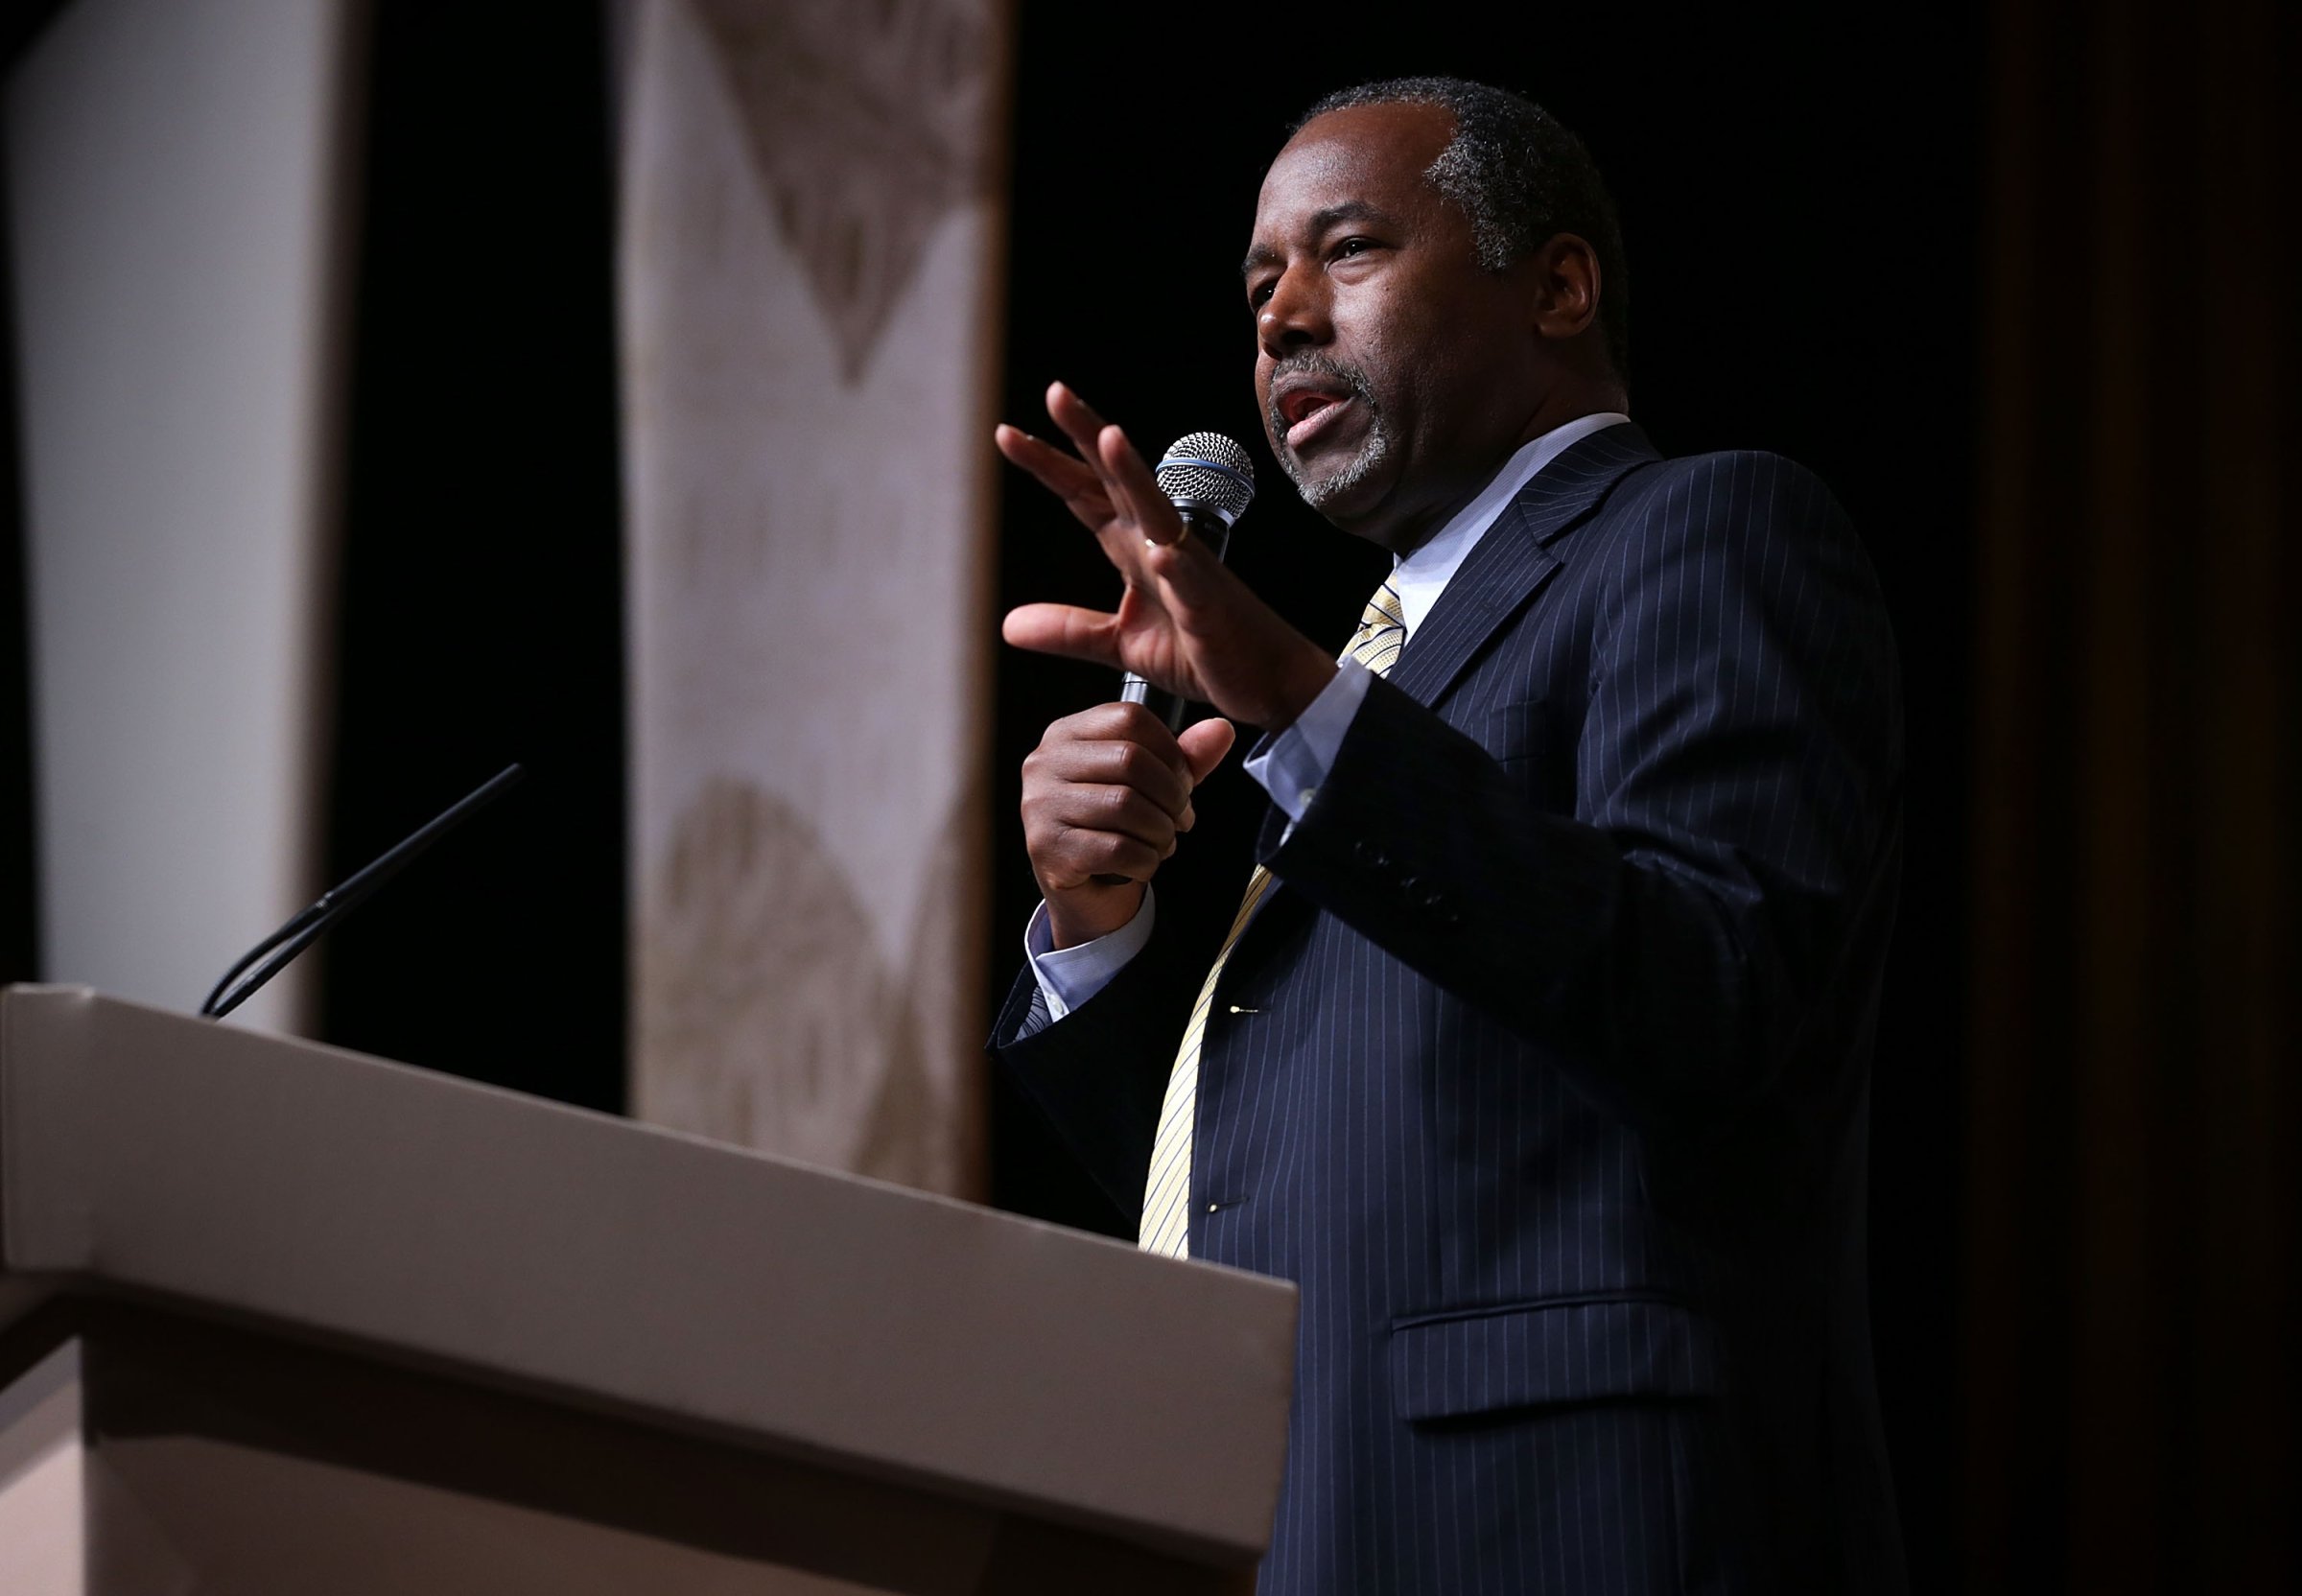 Republican U.S. presidential hopeful Ben Carson speaks during the "Road to Majority" conference June 19, 2015 in Washington, DC.